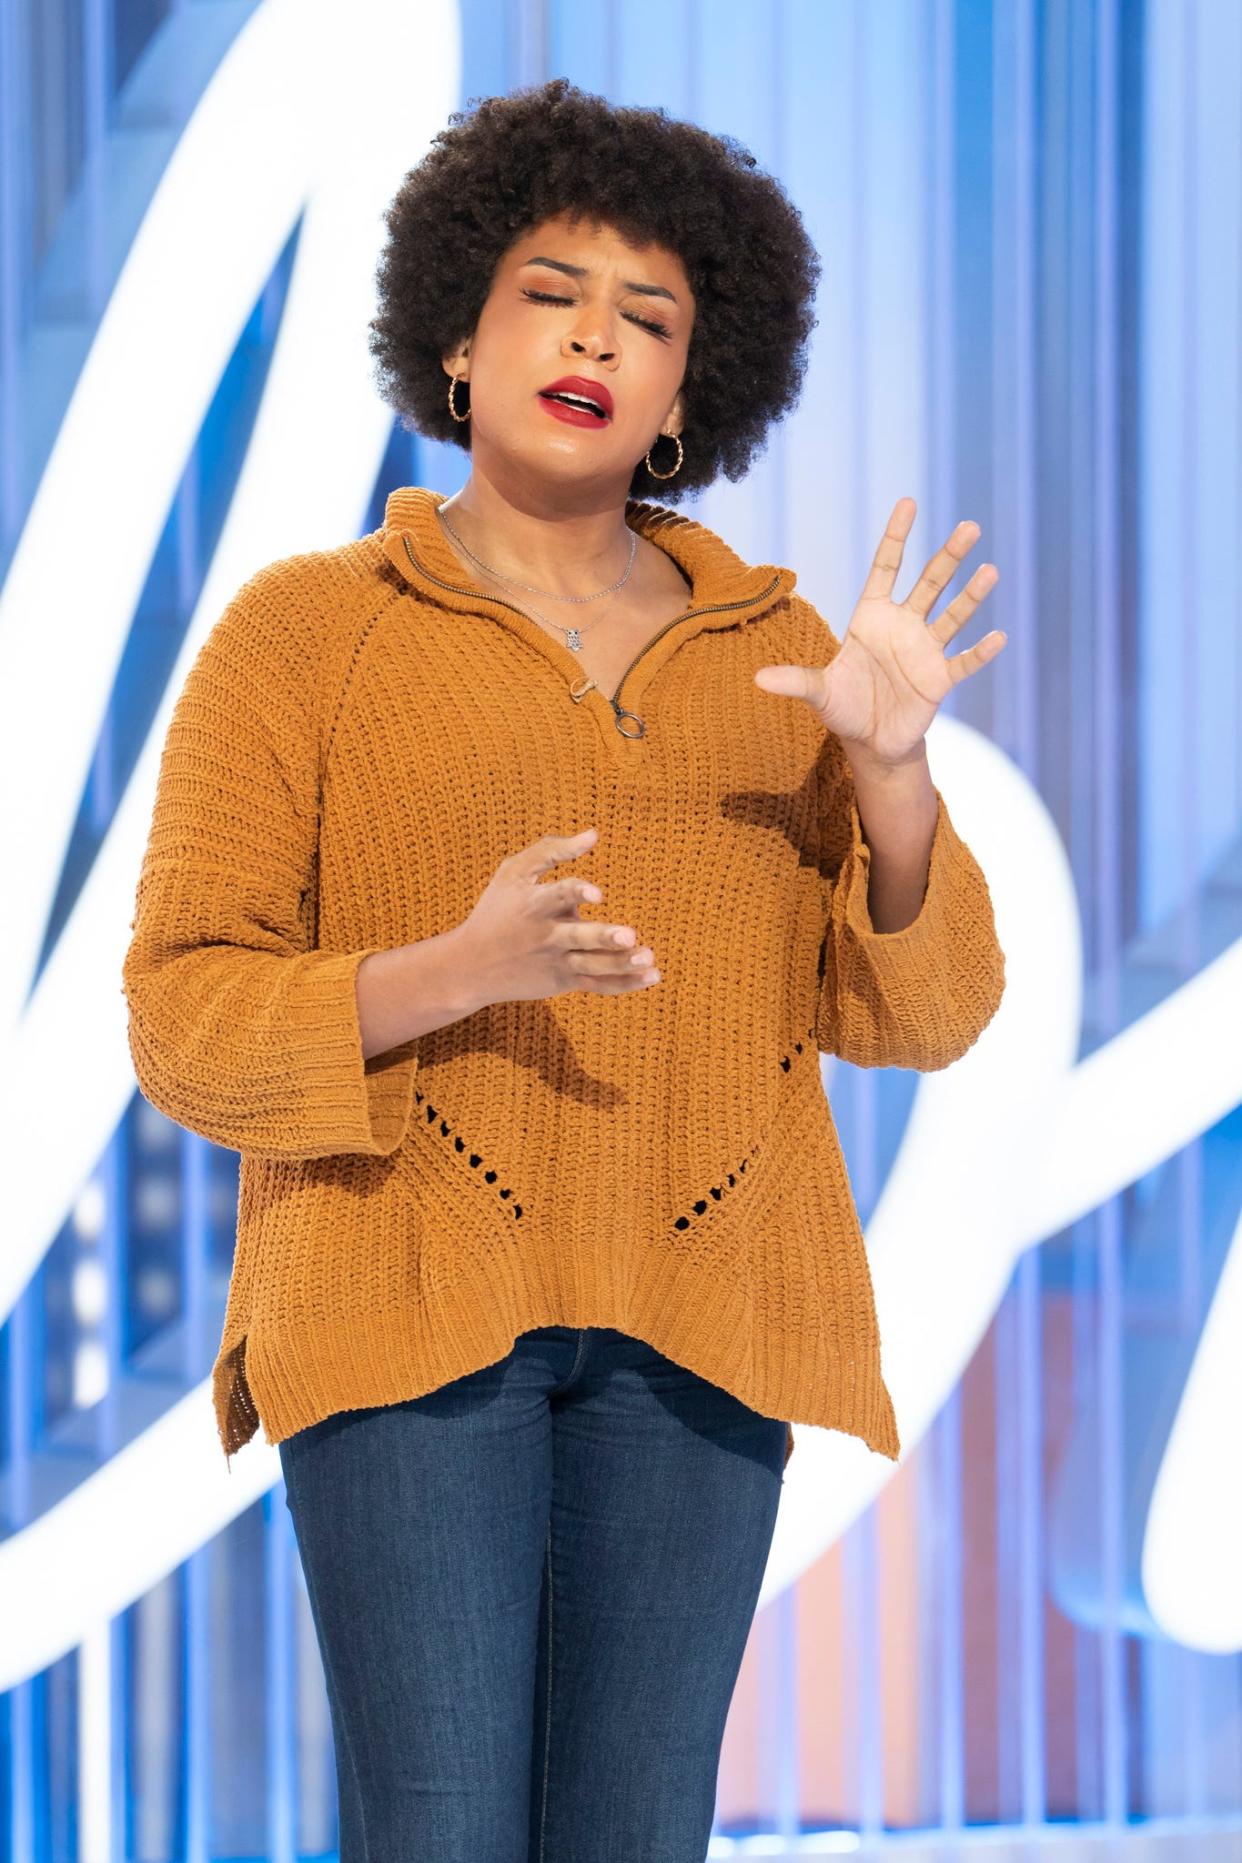 Amari Scott Keys, a waitress at Wings and Rings in Richmond, appeared on the March 17 episode of season 22 of American Idol.